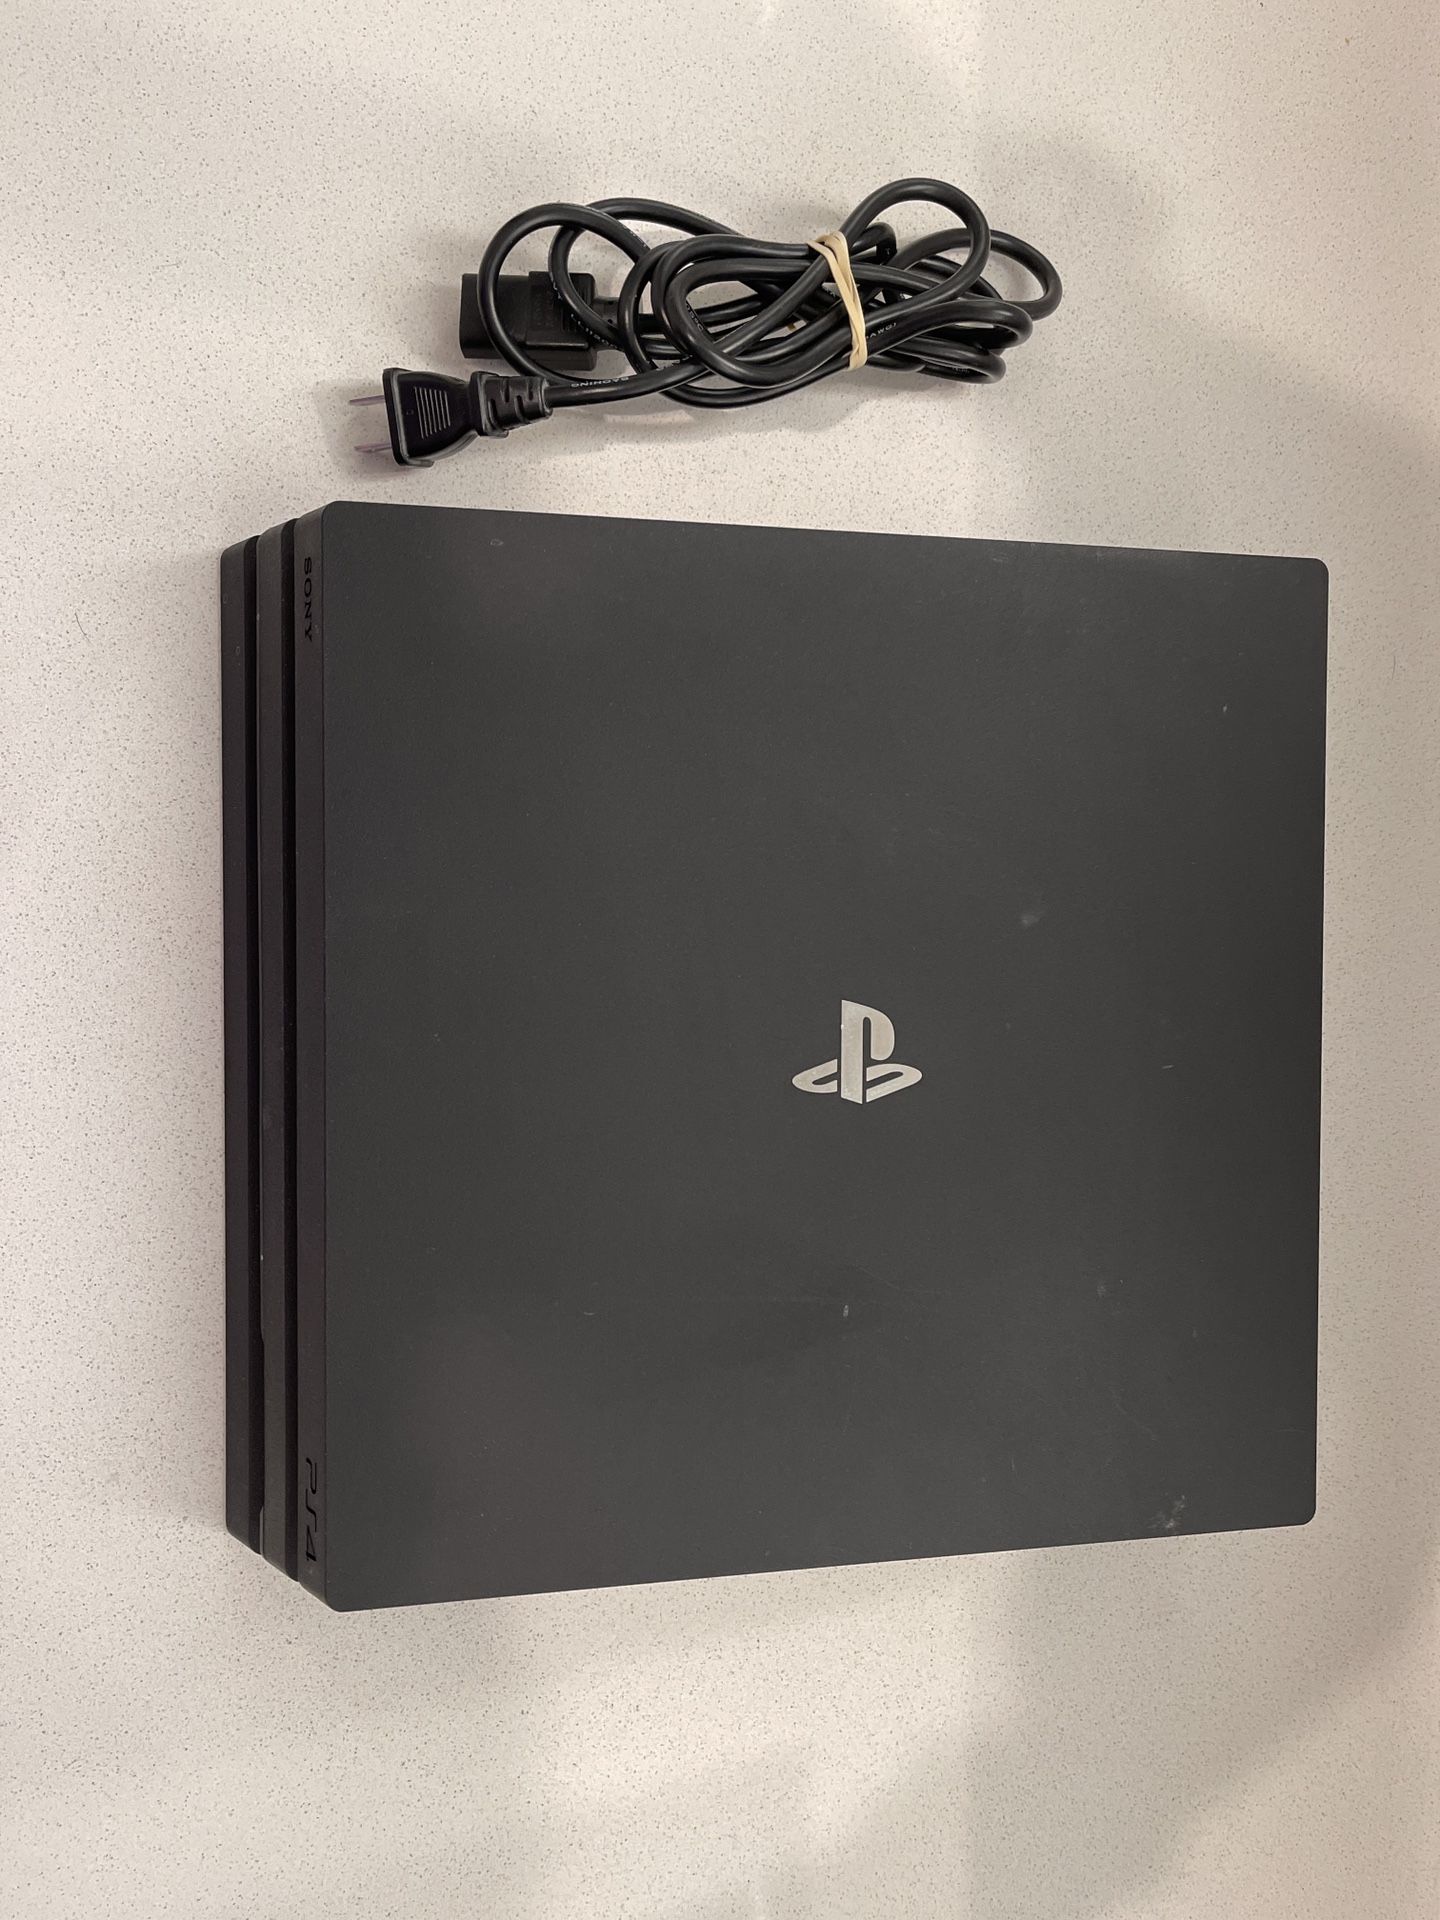 PS4 Pro 1tb with games,headphones,and extra controller